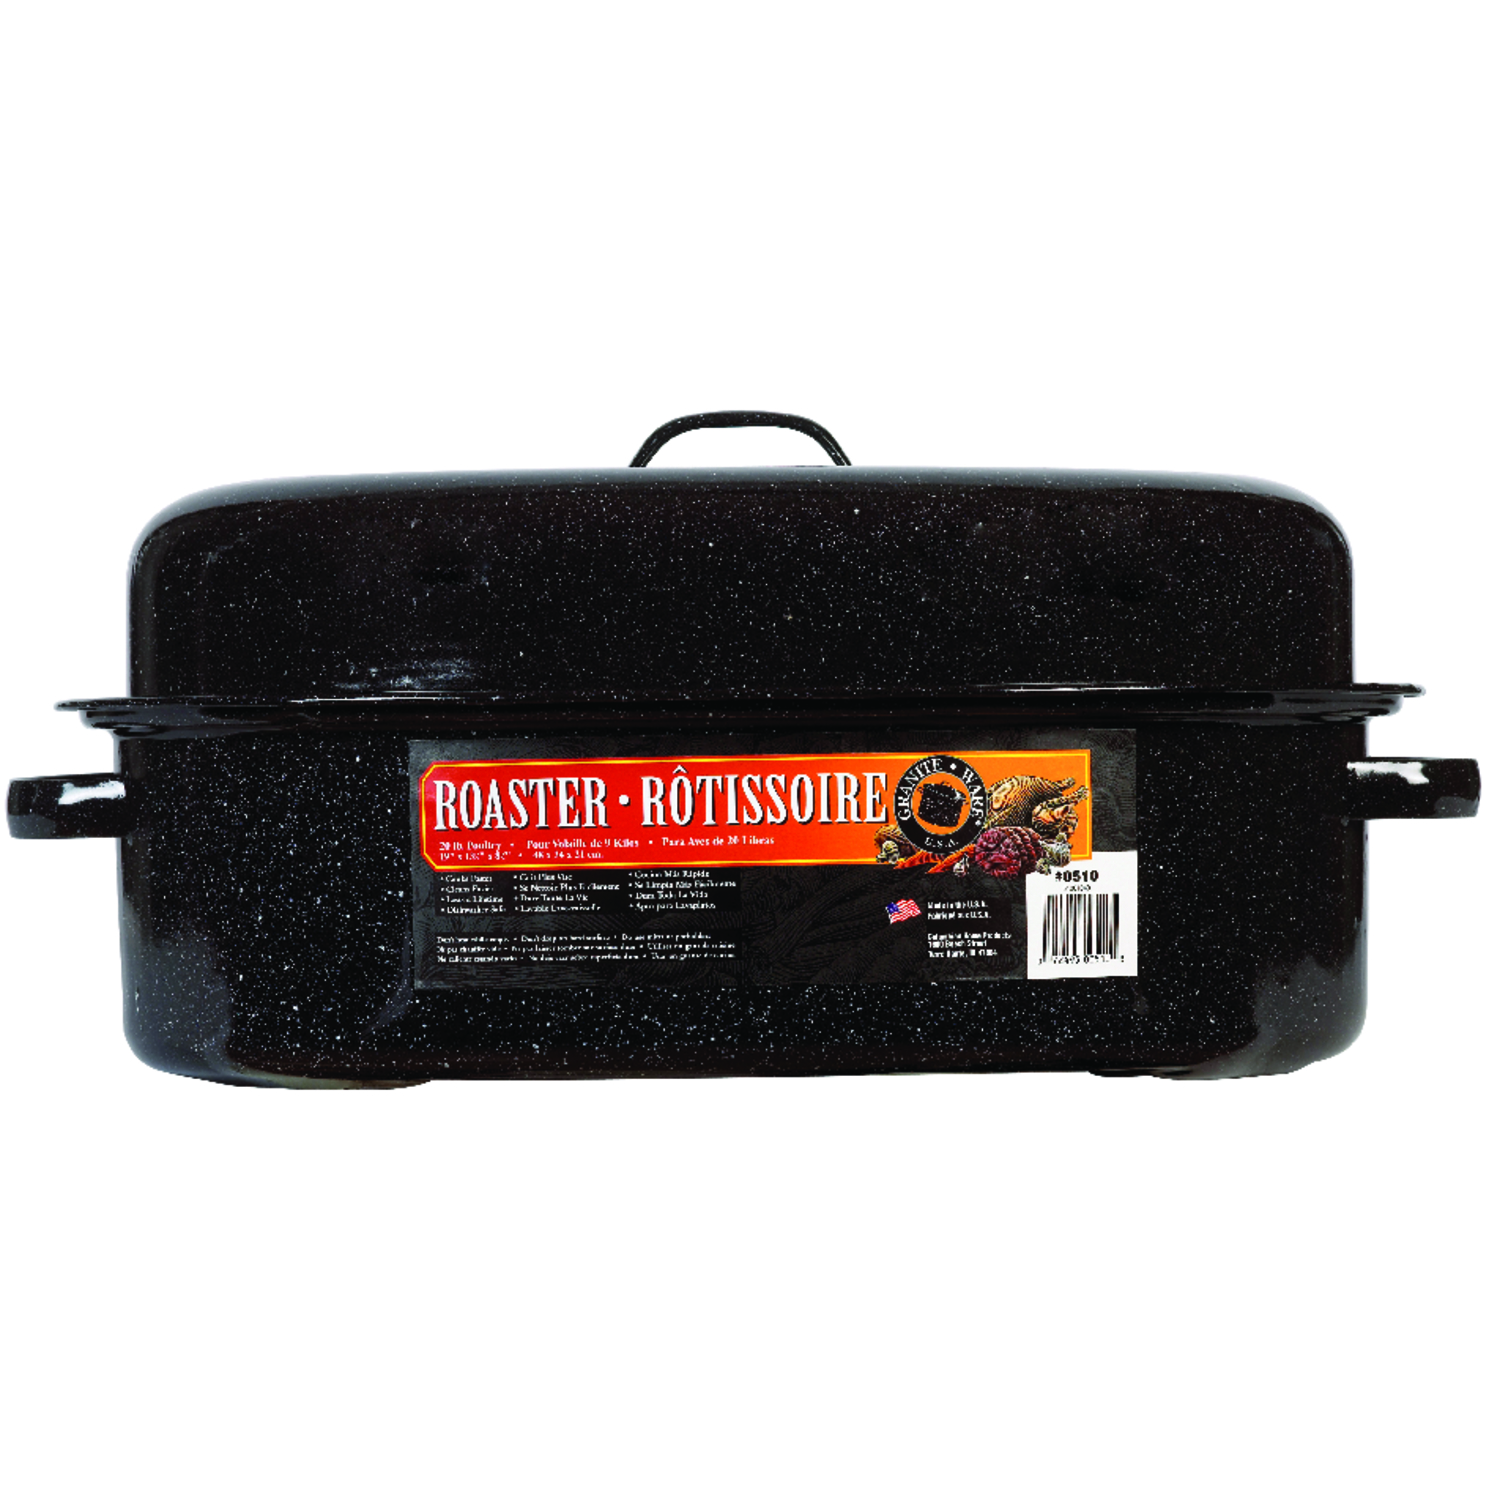 Granite Ware Oval Roaster 19 inch with Lid (Speckled Black) - Enamelware  roasting pan. Home or on the Grill. Great Grilling, Boiling, Baking or